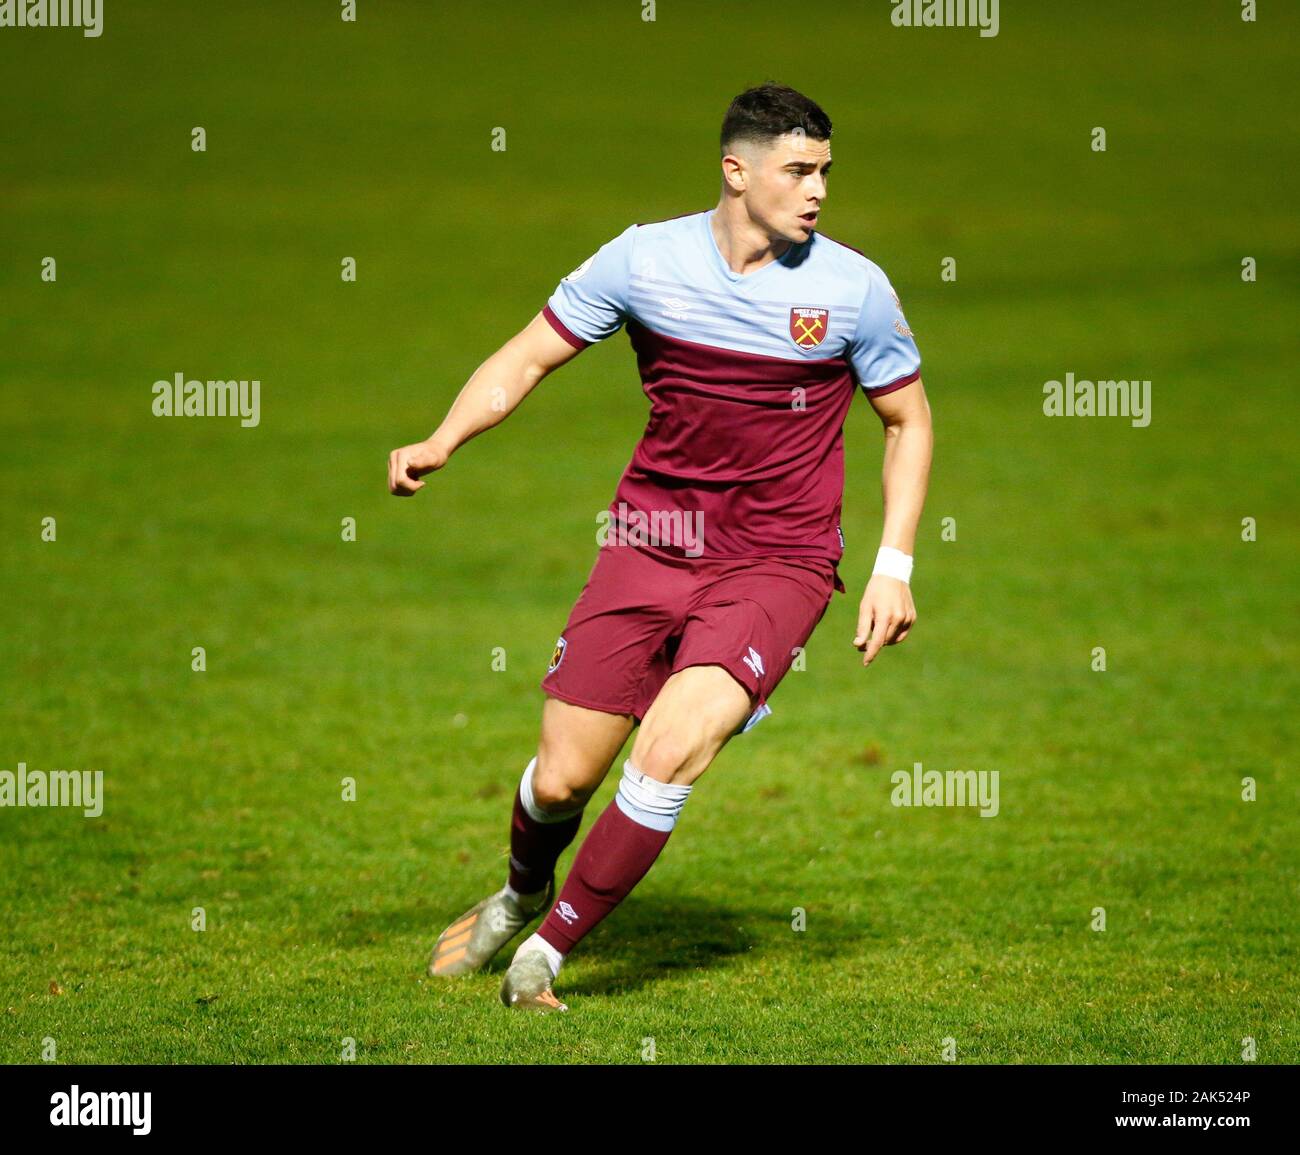 LONDON, ENGLAND. JANUARY 06: Joe Powell of West Ham United in action  during Premier League 2  match between West Ham United and Manchester United at Stock Photo